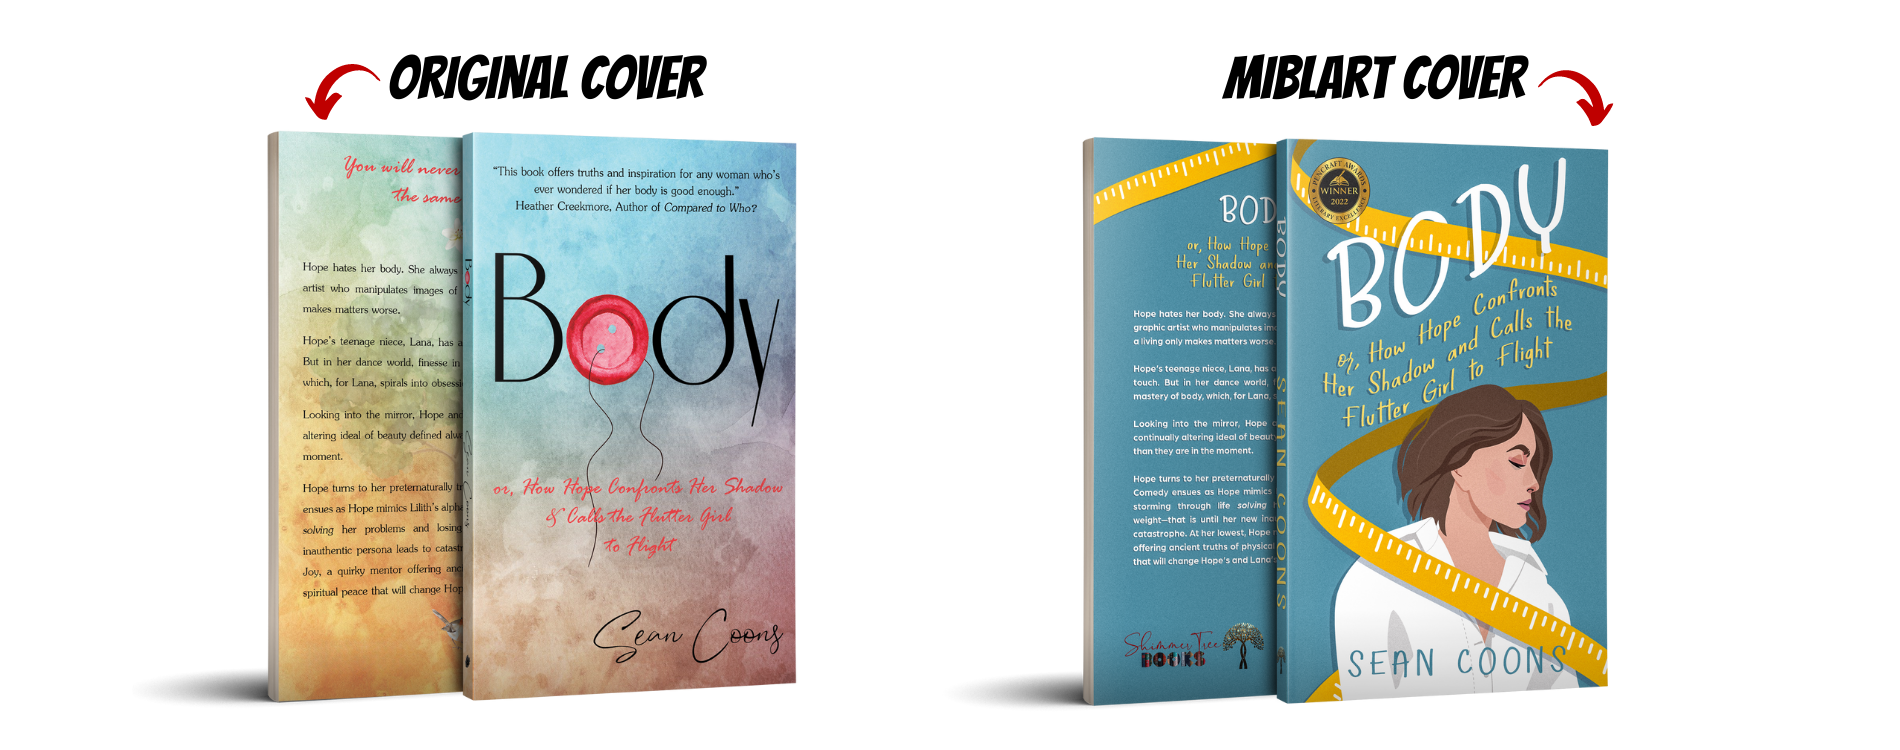 Body by Sean Coons - comparison of original cover with cover by MiblArt